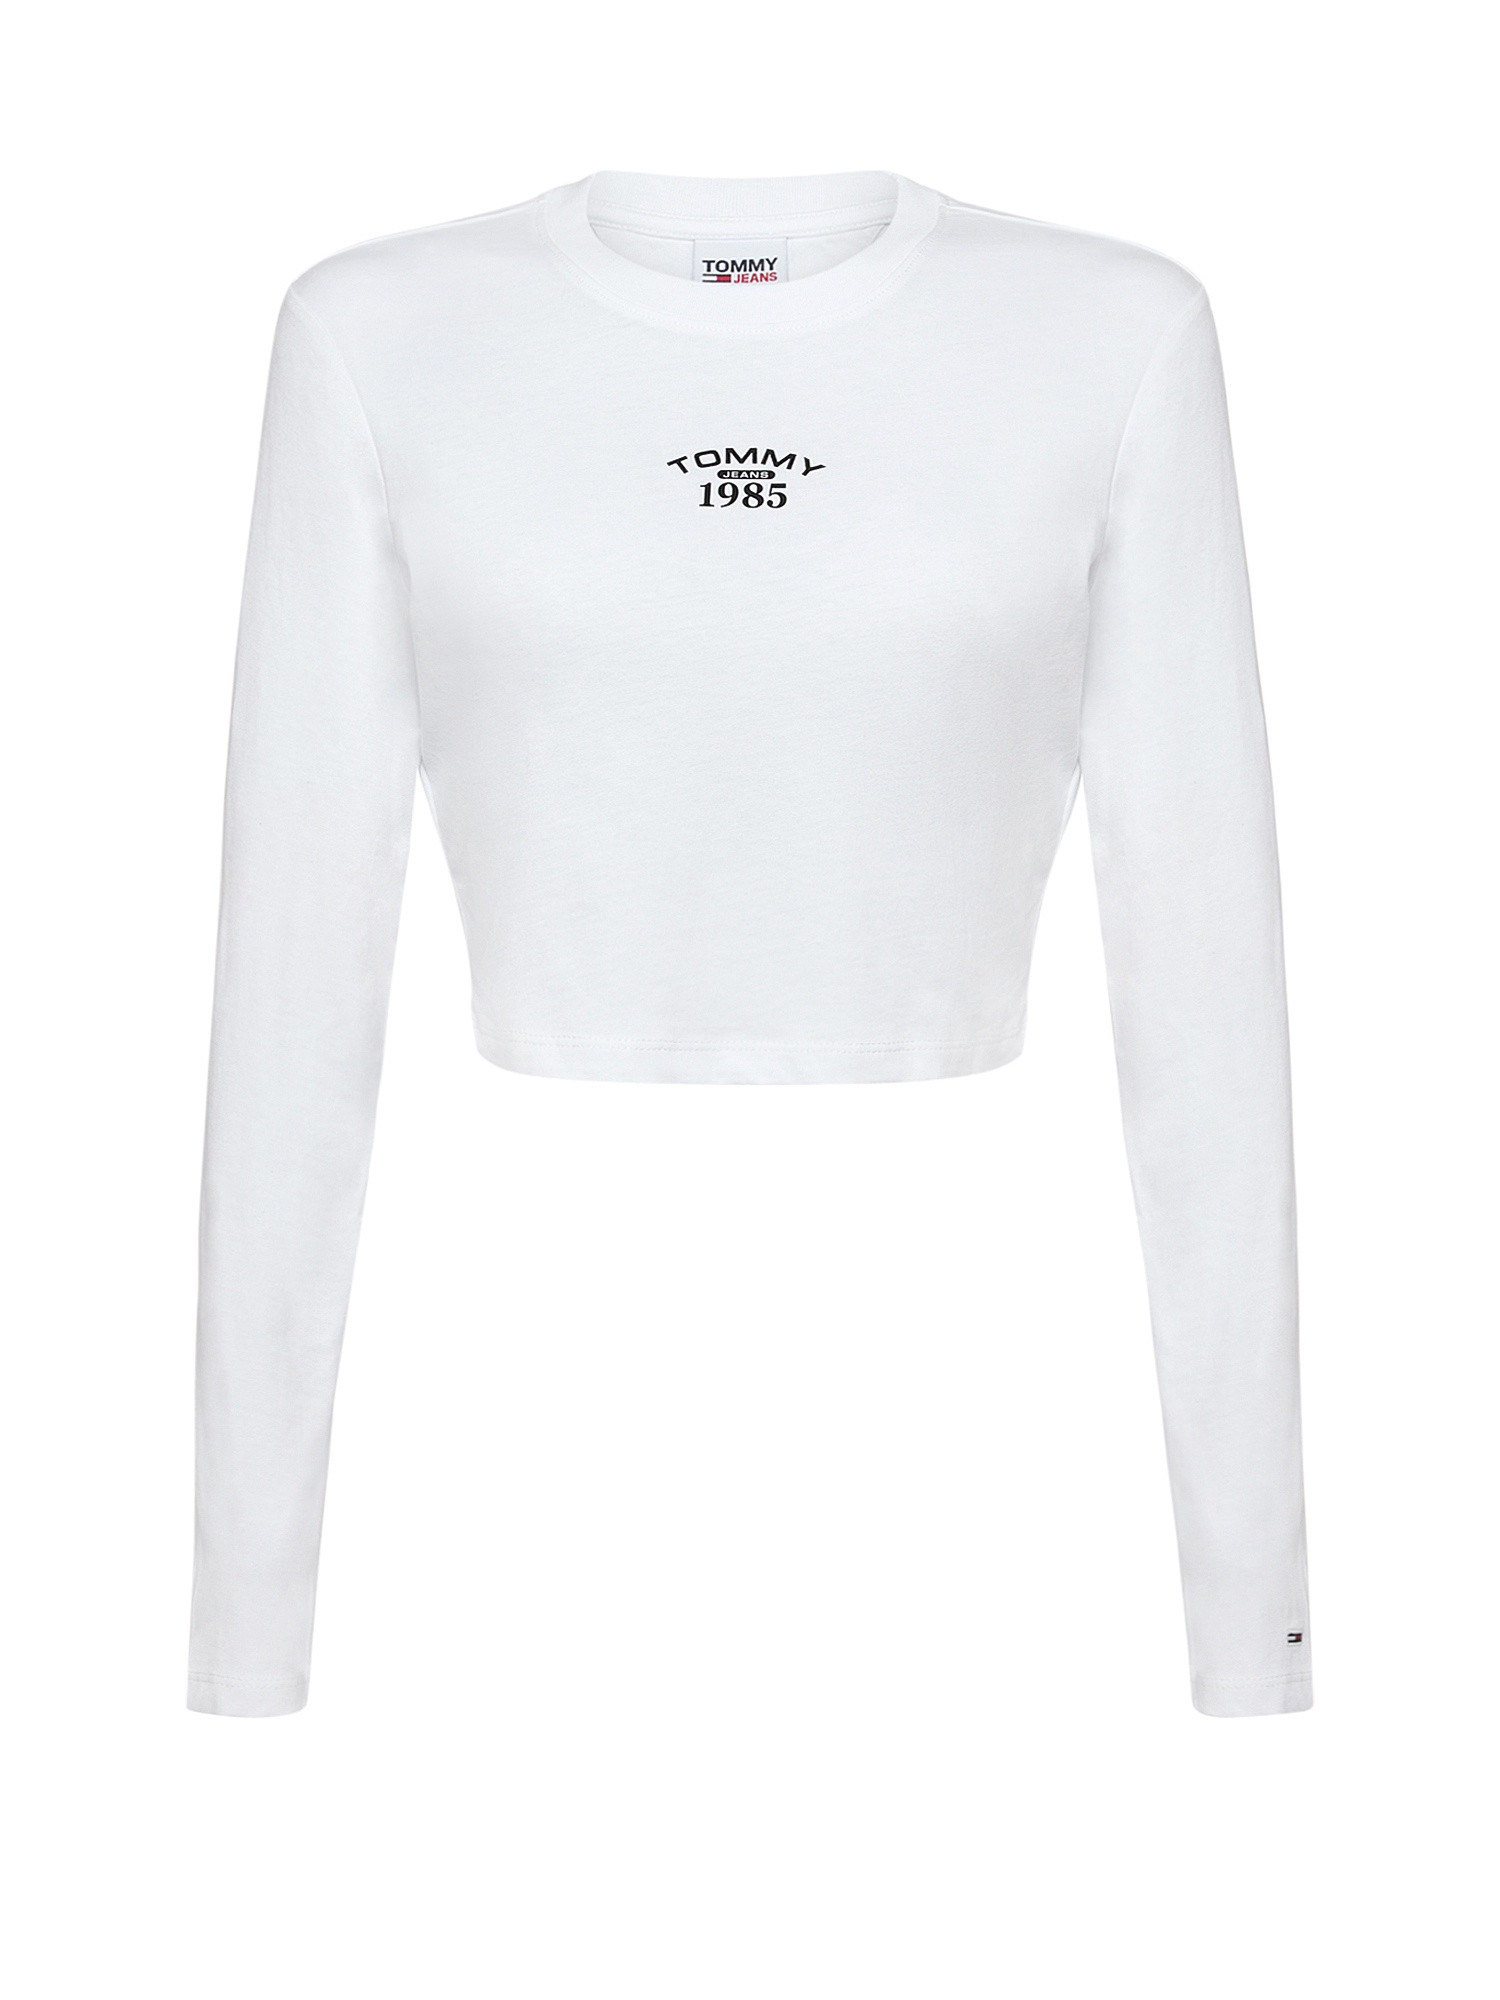 Tommy Jeans - Crop top in cotone con logo, Bianco, large image number 0